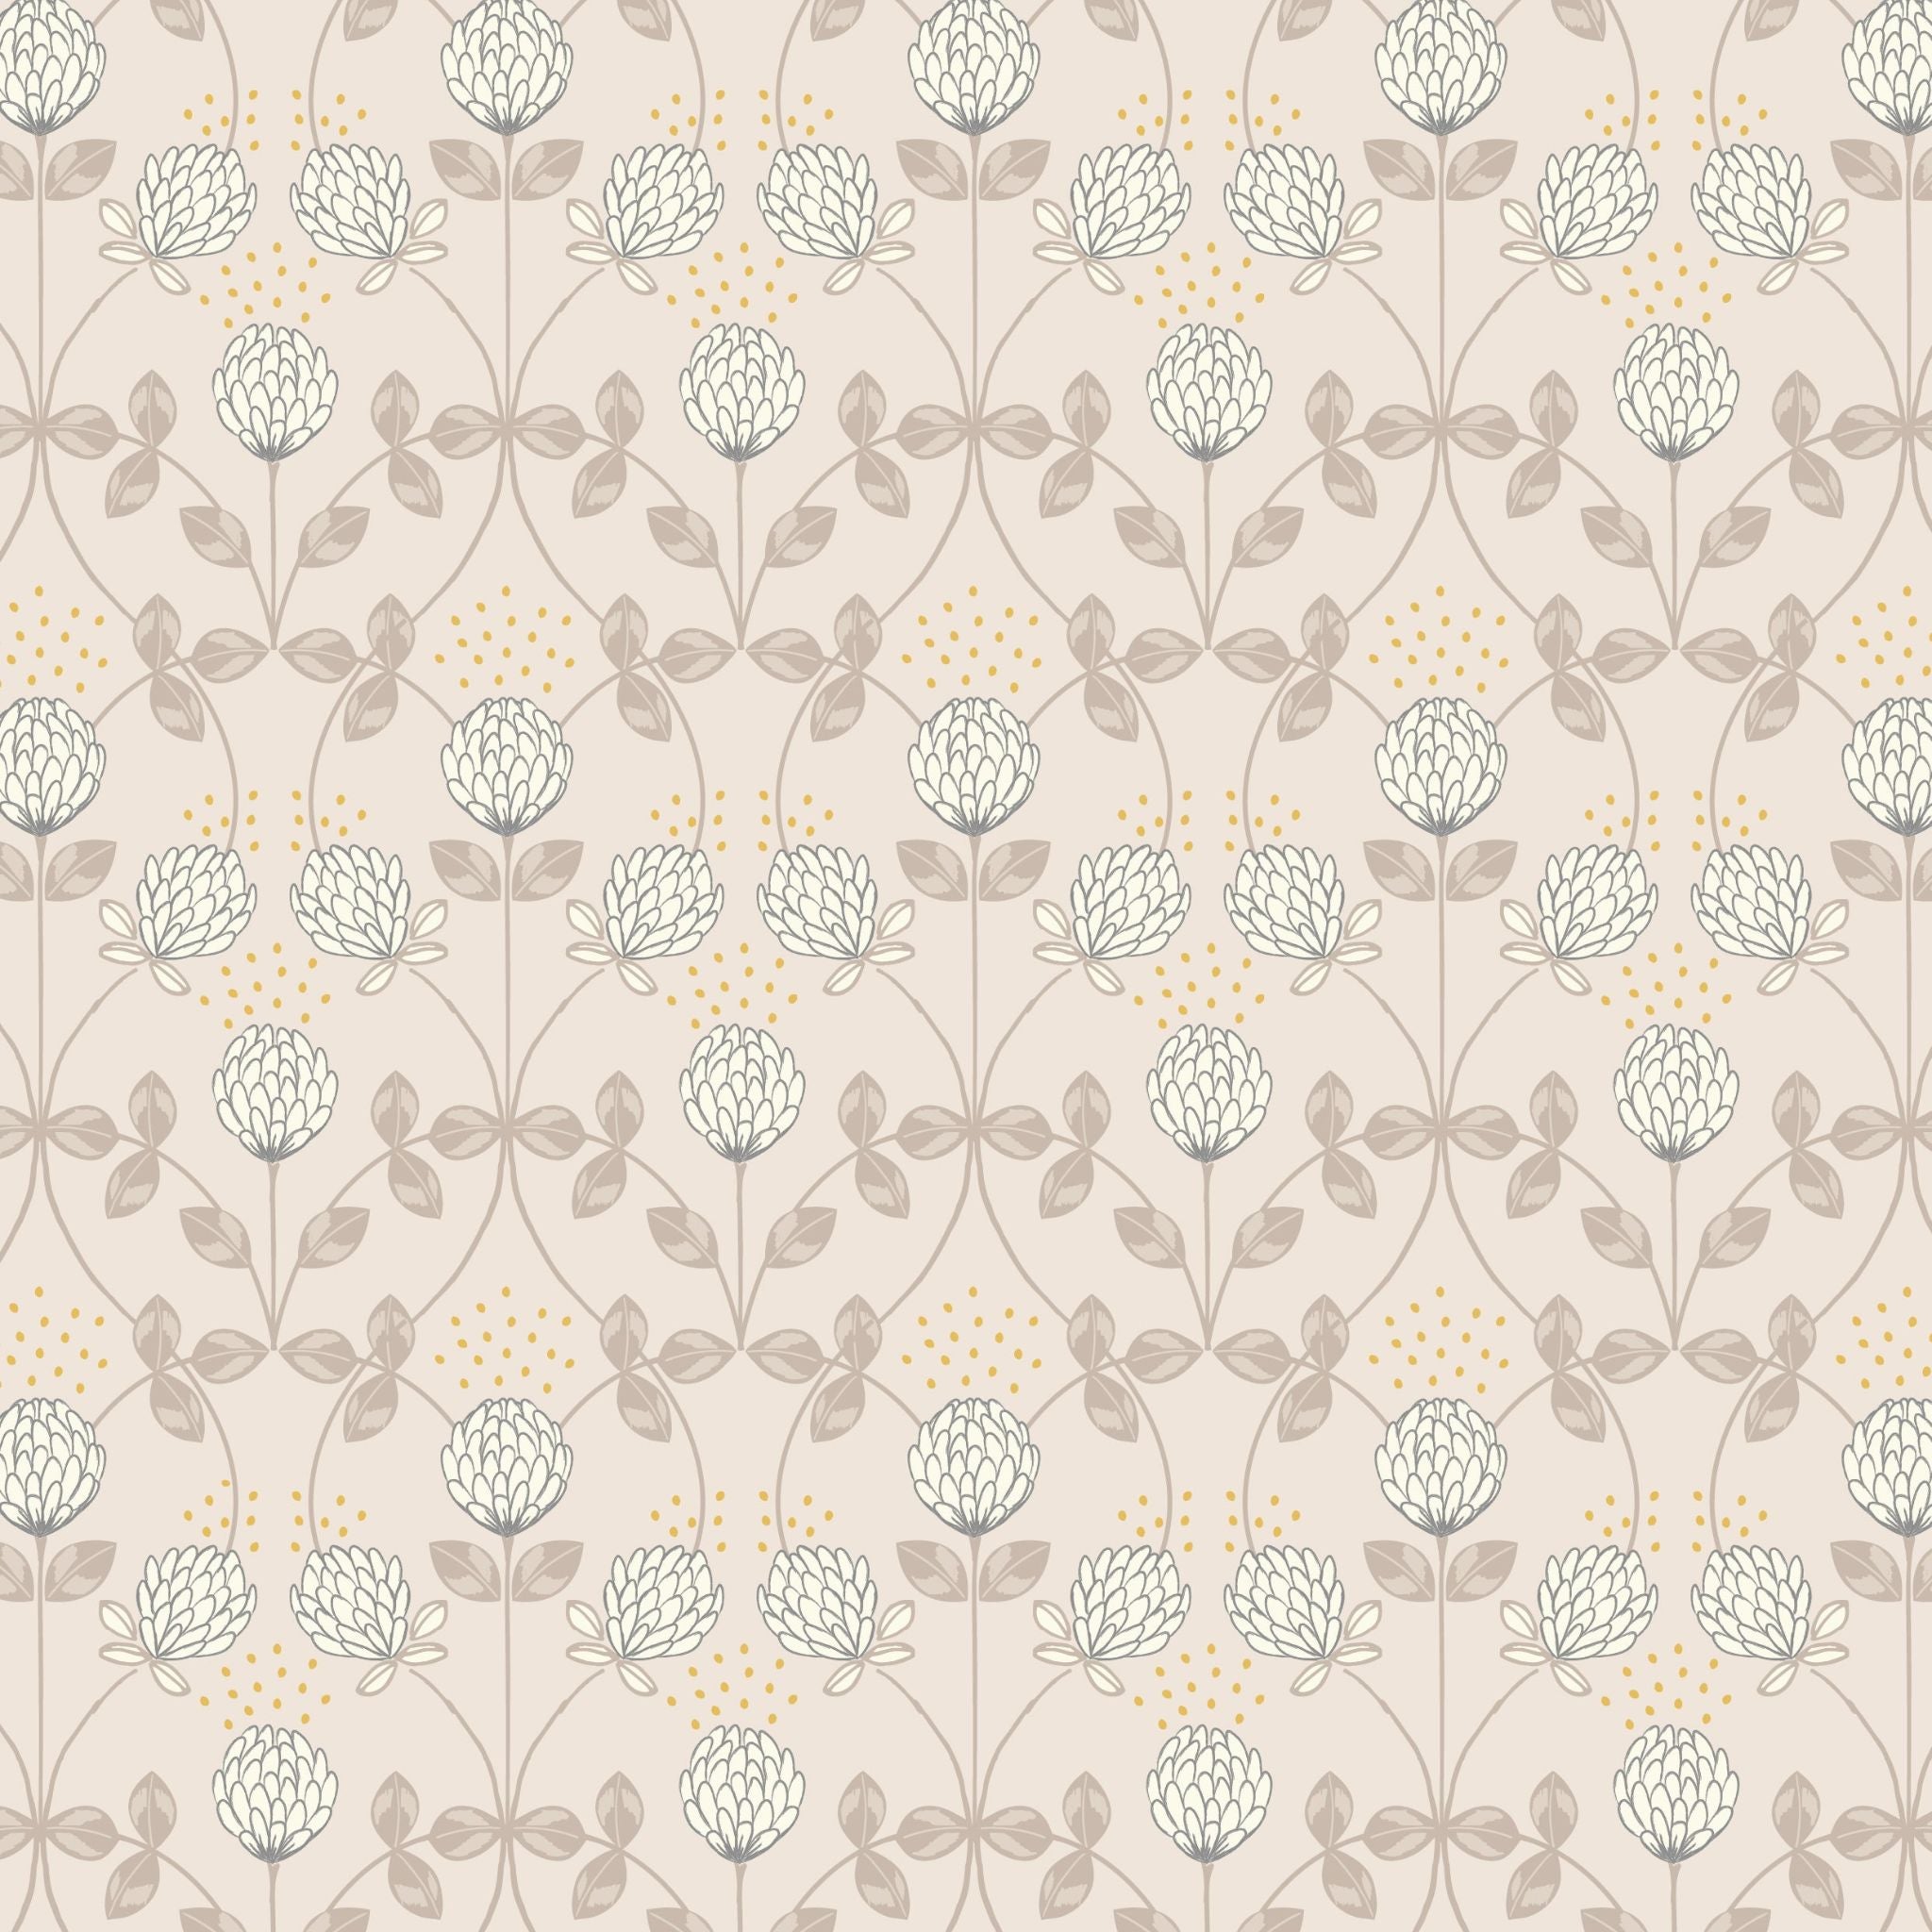 White clover on a natural cotton fabric with gold metallic leaves - Honey Bee by Lewis and Irene